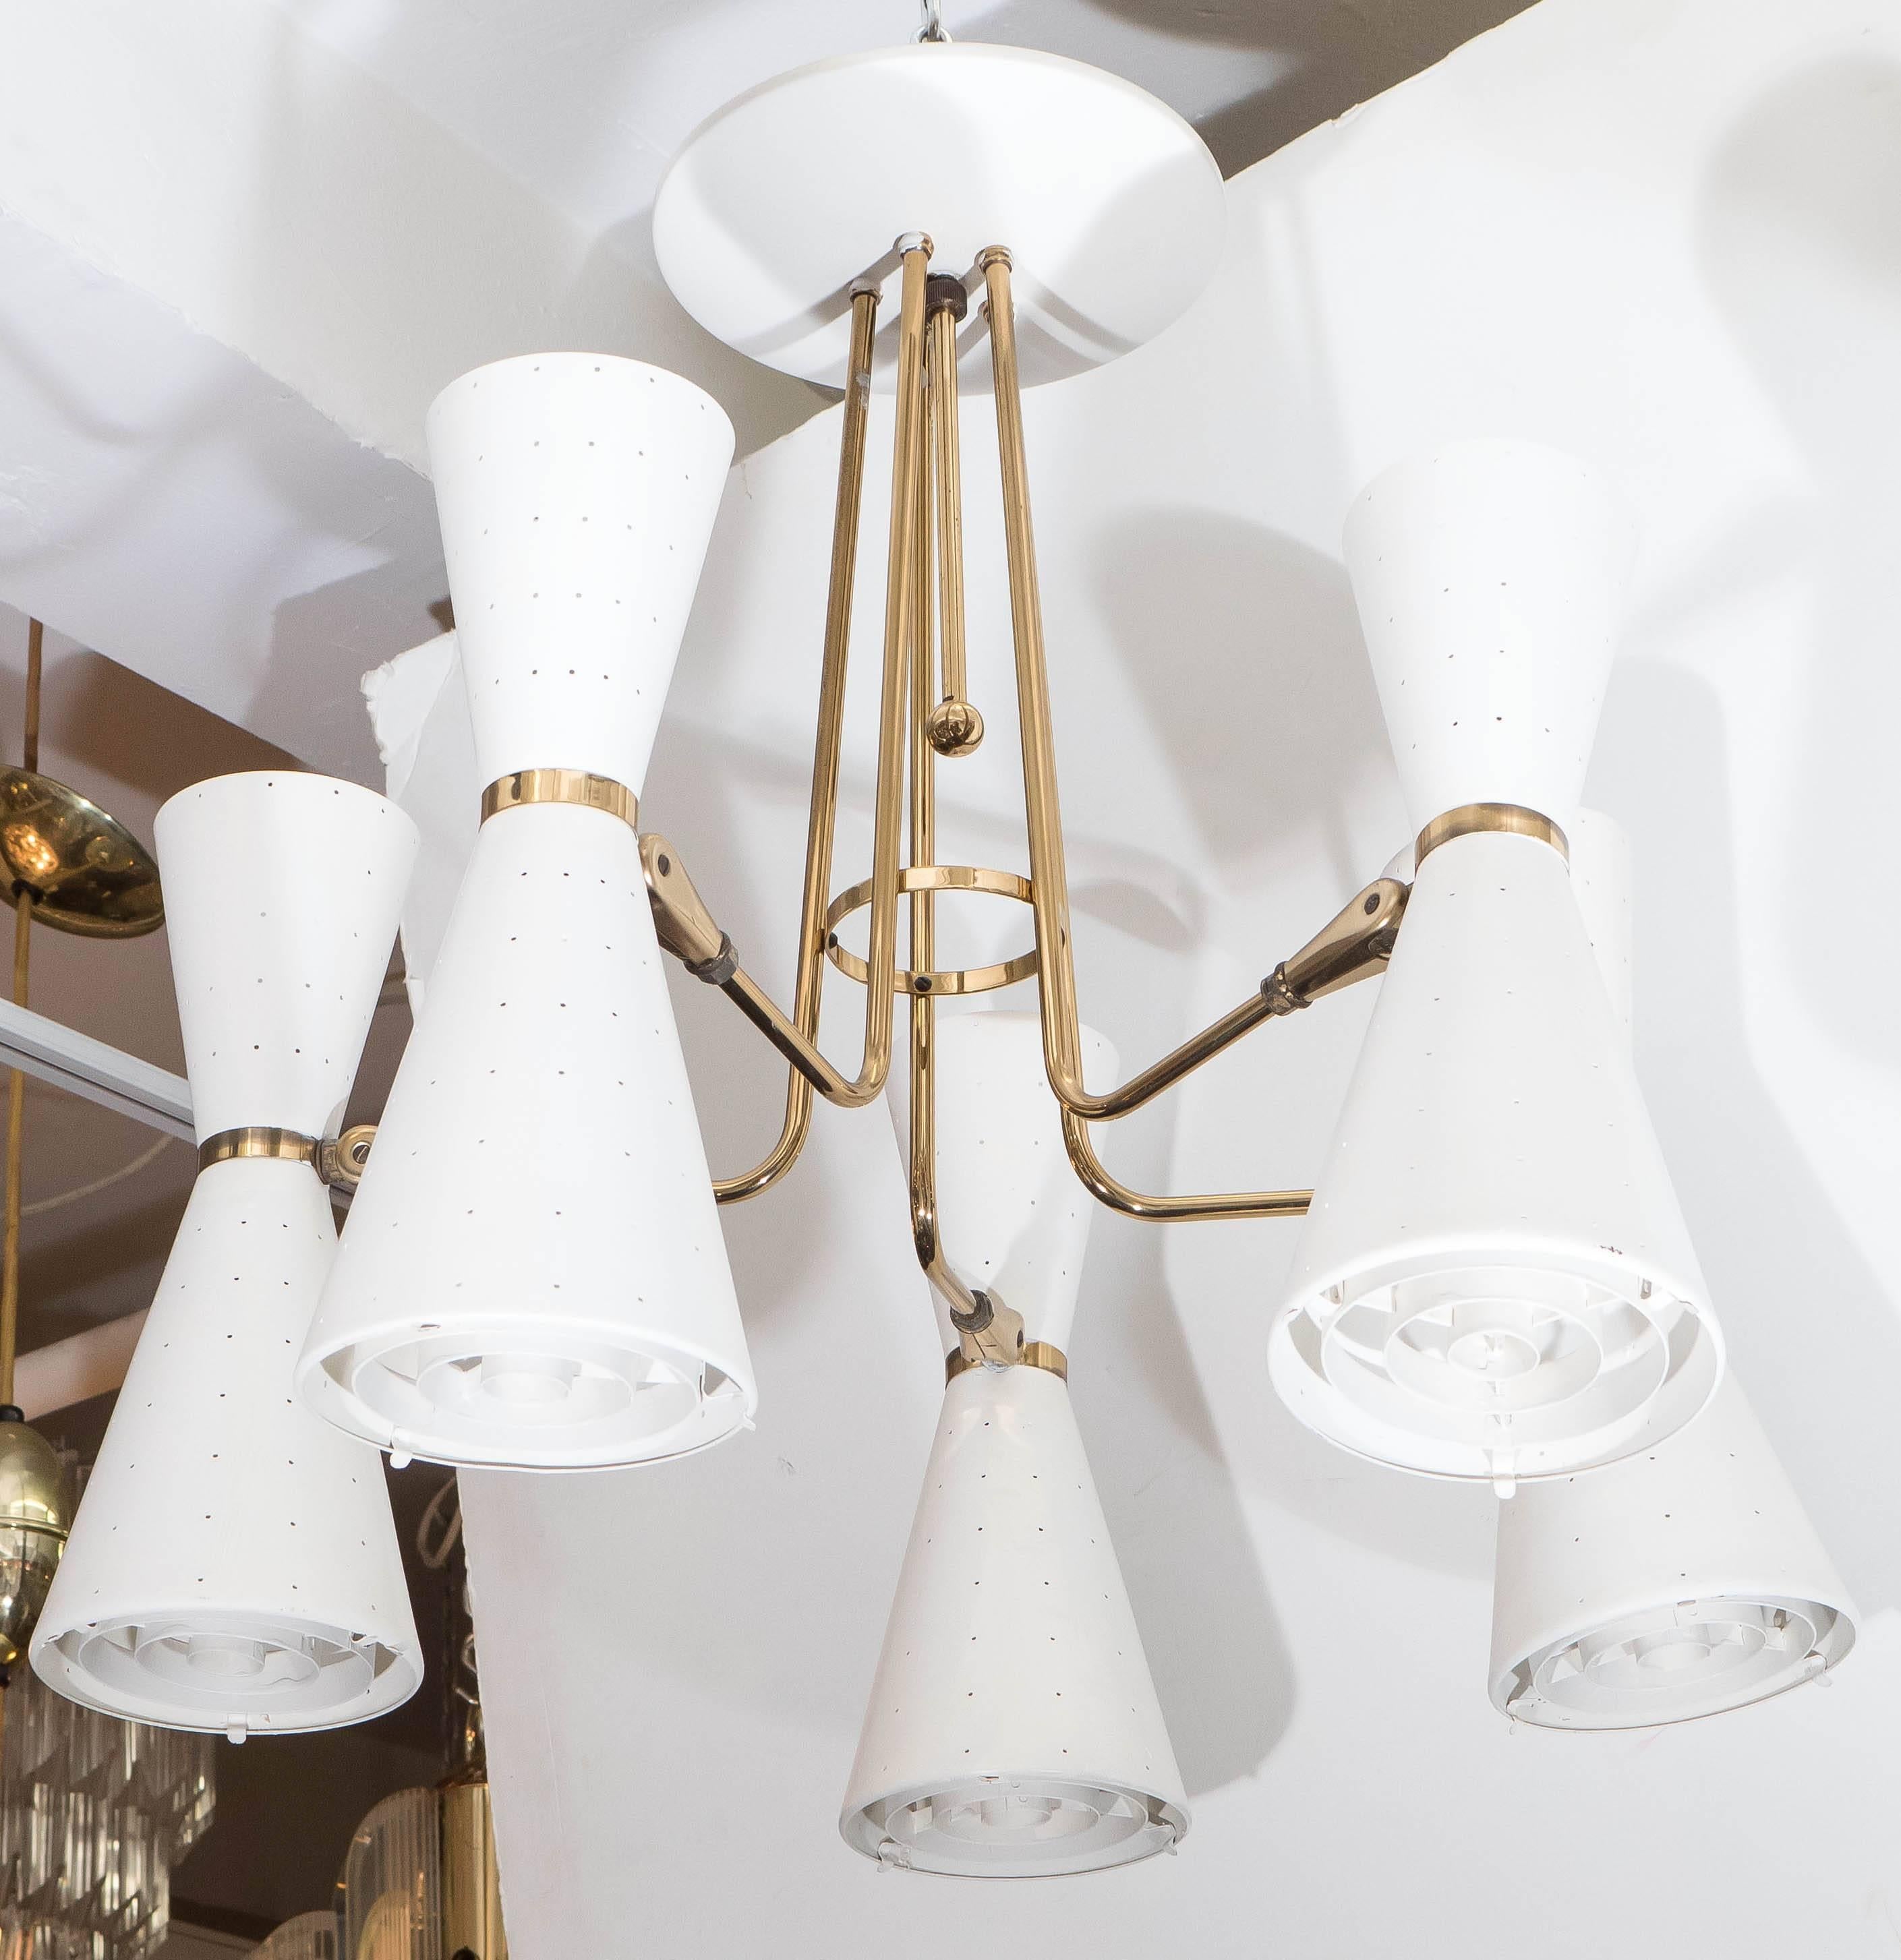 A Lightolier chandelier, produced circa 1960s, with five curved brass arms, each supporting dualistic, white painted conical shades with perforated detail and diffusers, suspended from a saucer form canopy. Requires ten medium base bulbs. This light